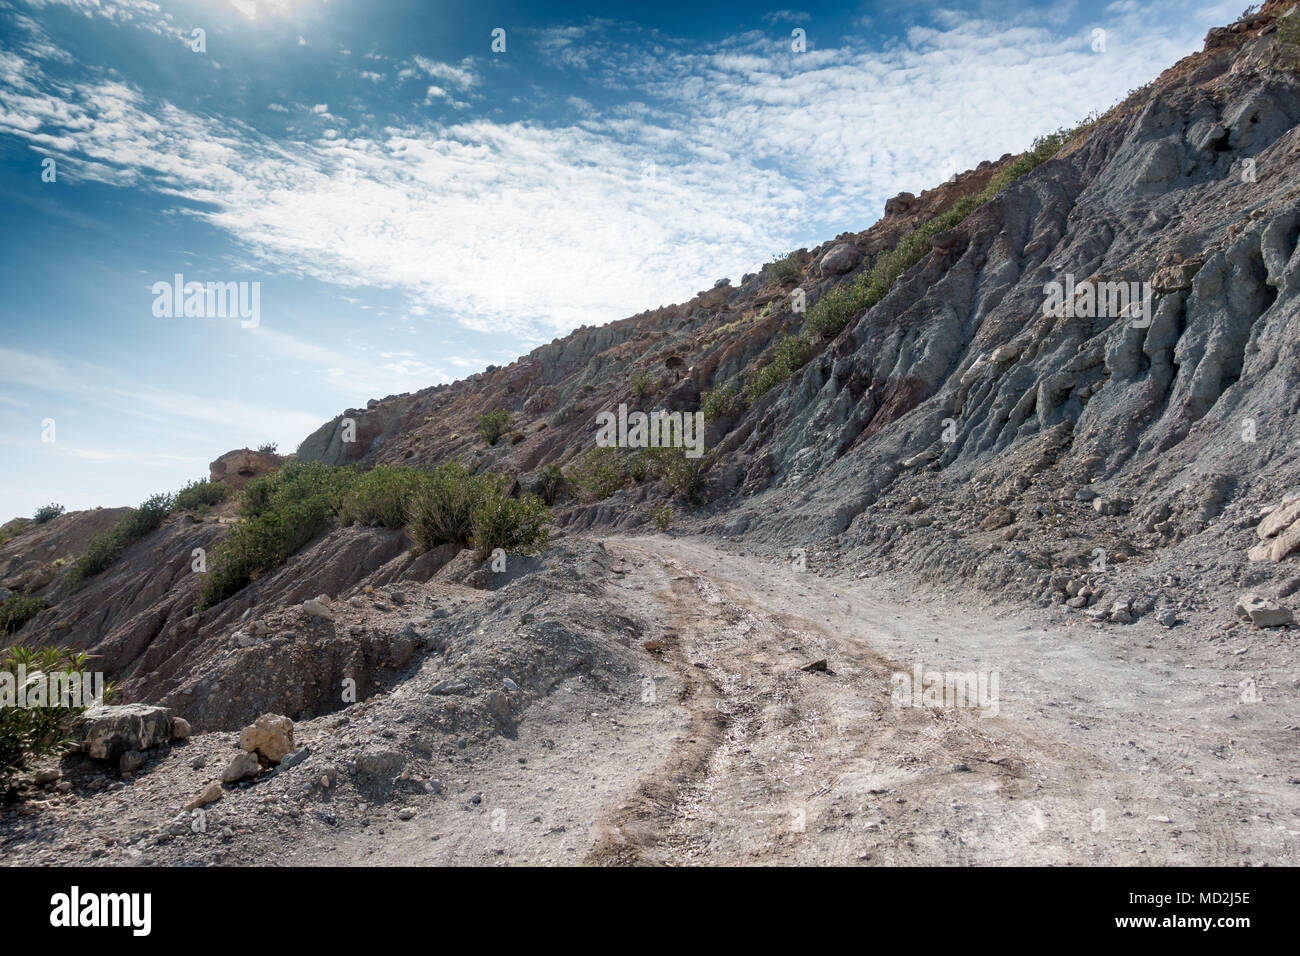 Dirt road and rocky mountain against sky, Crete, Greece Stock Photo